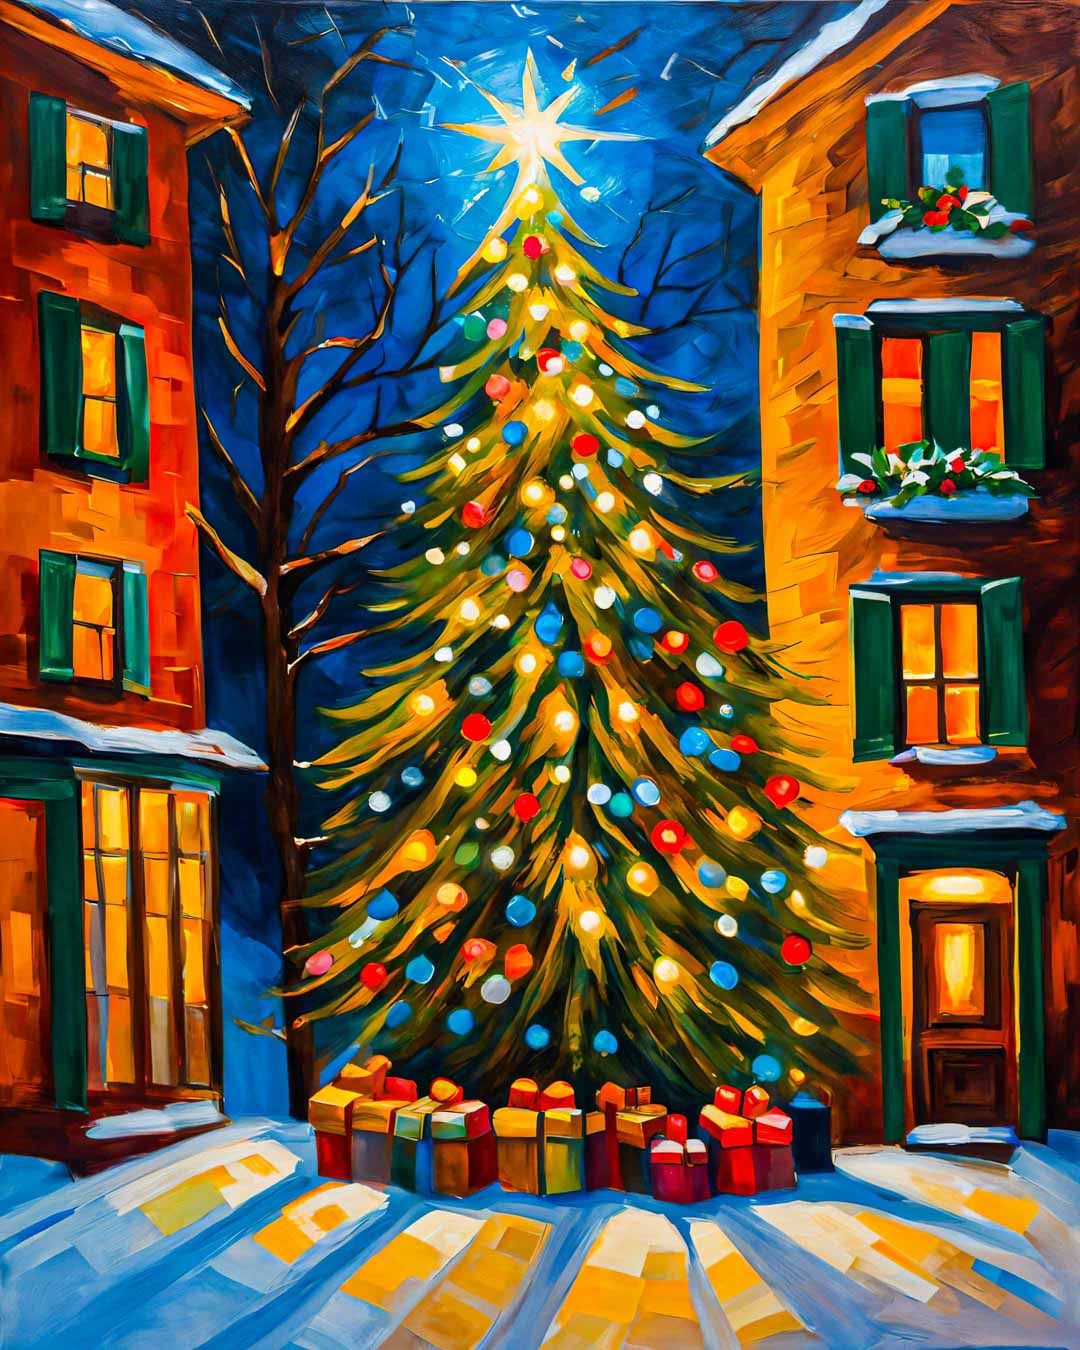 Night before christmas - Poster - Ever colorful